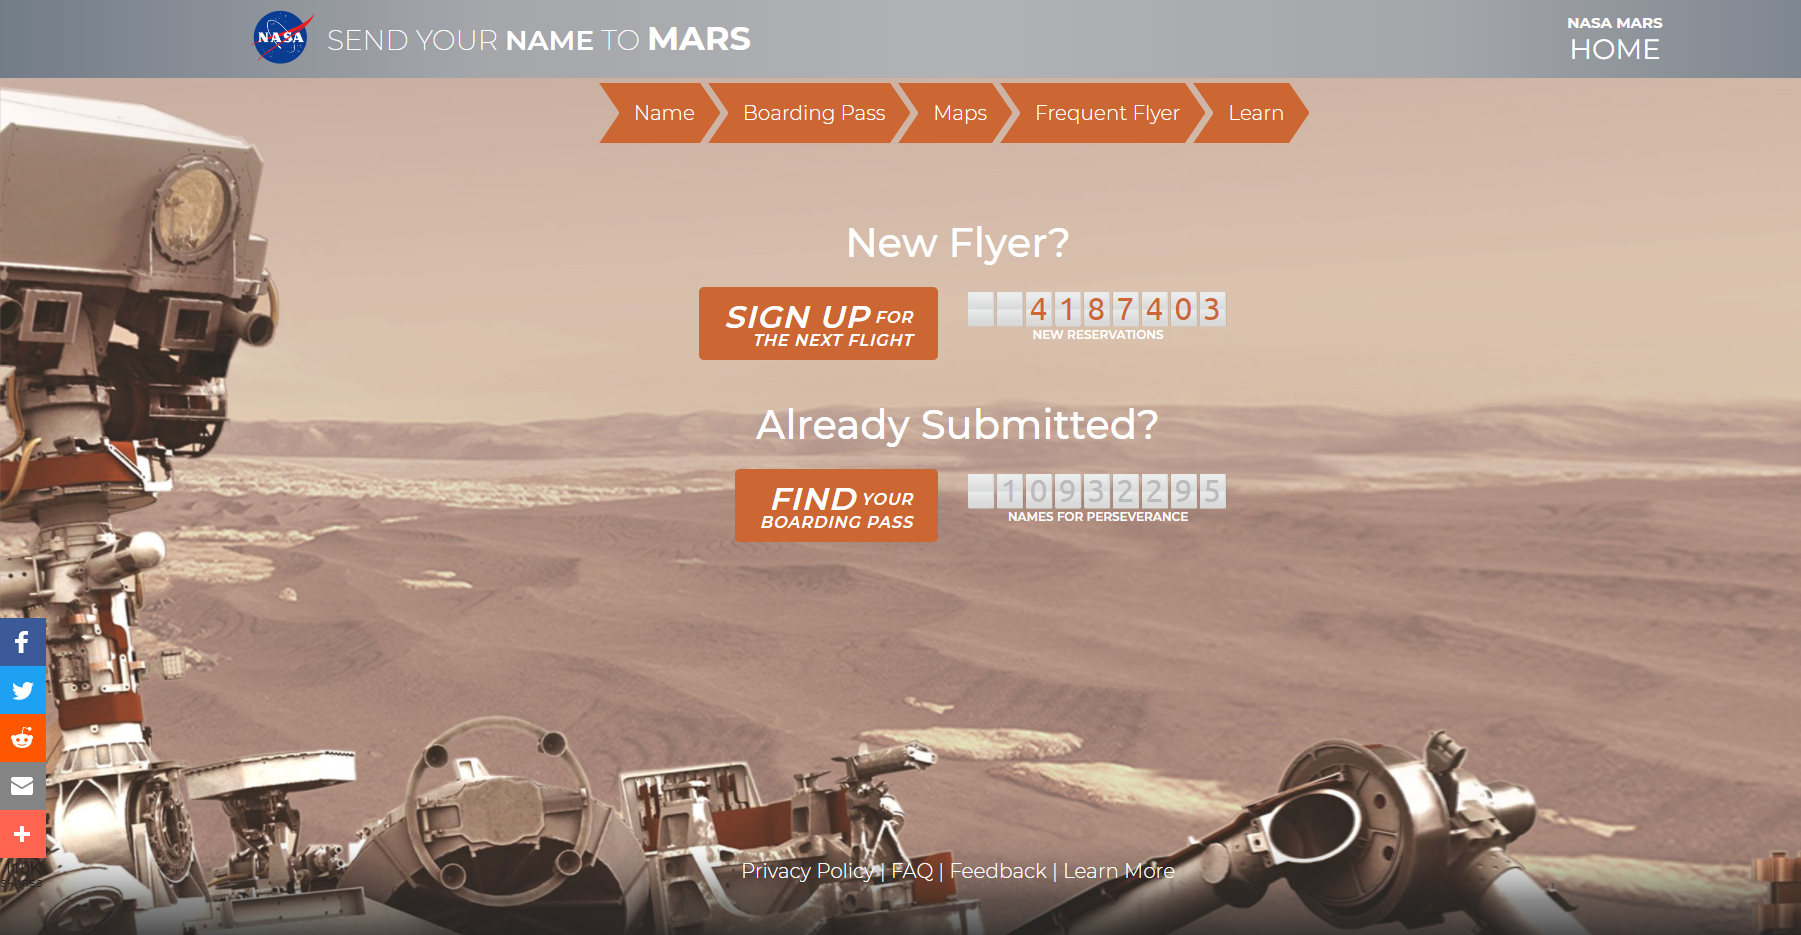 send-your-name-to-mars-for-free-2021-1-29